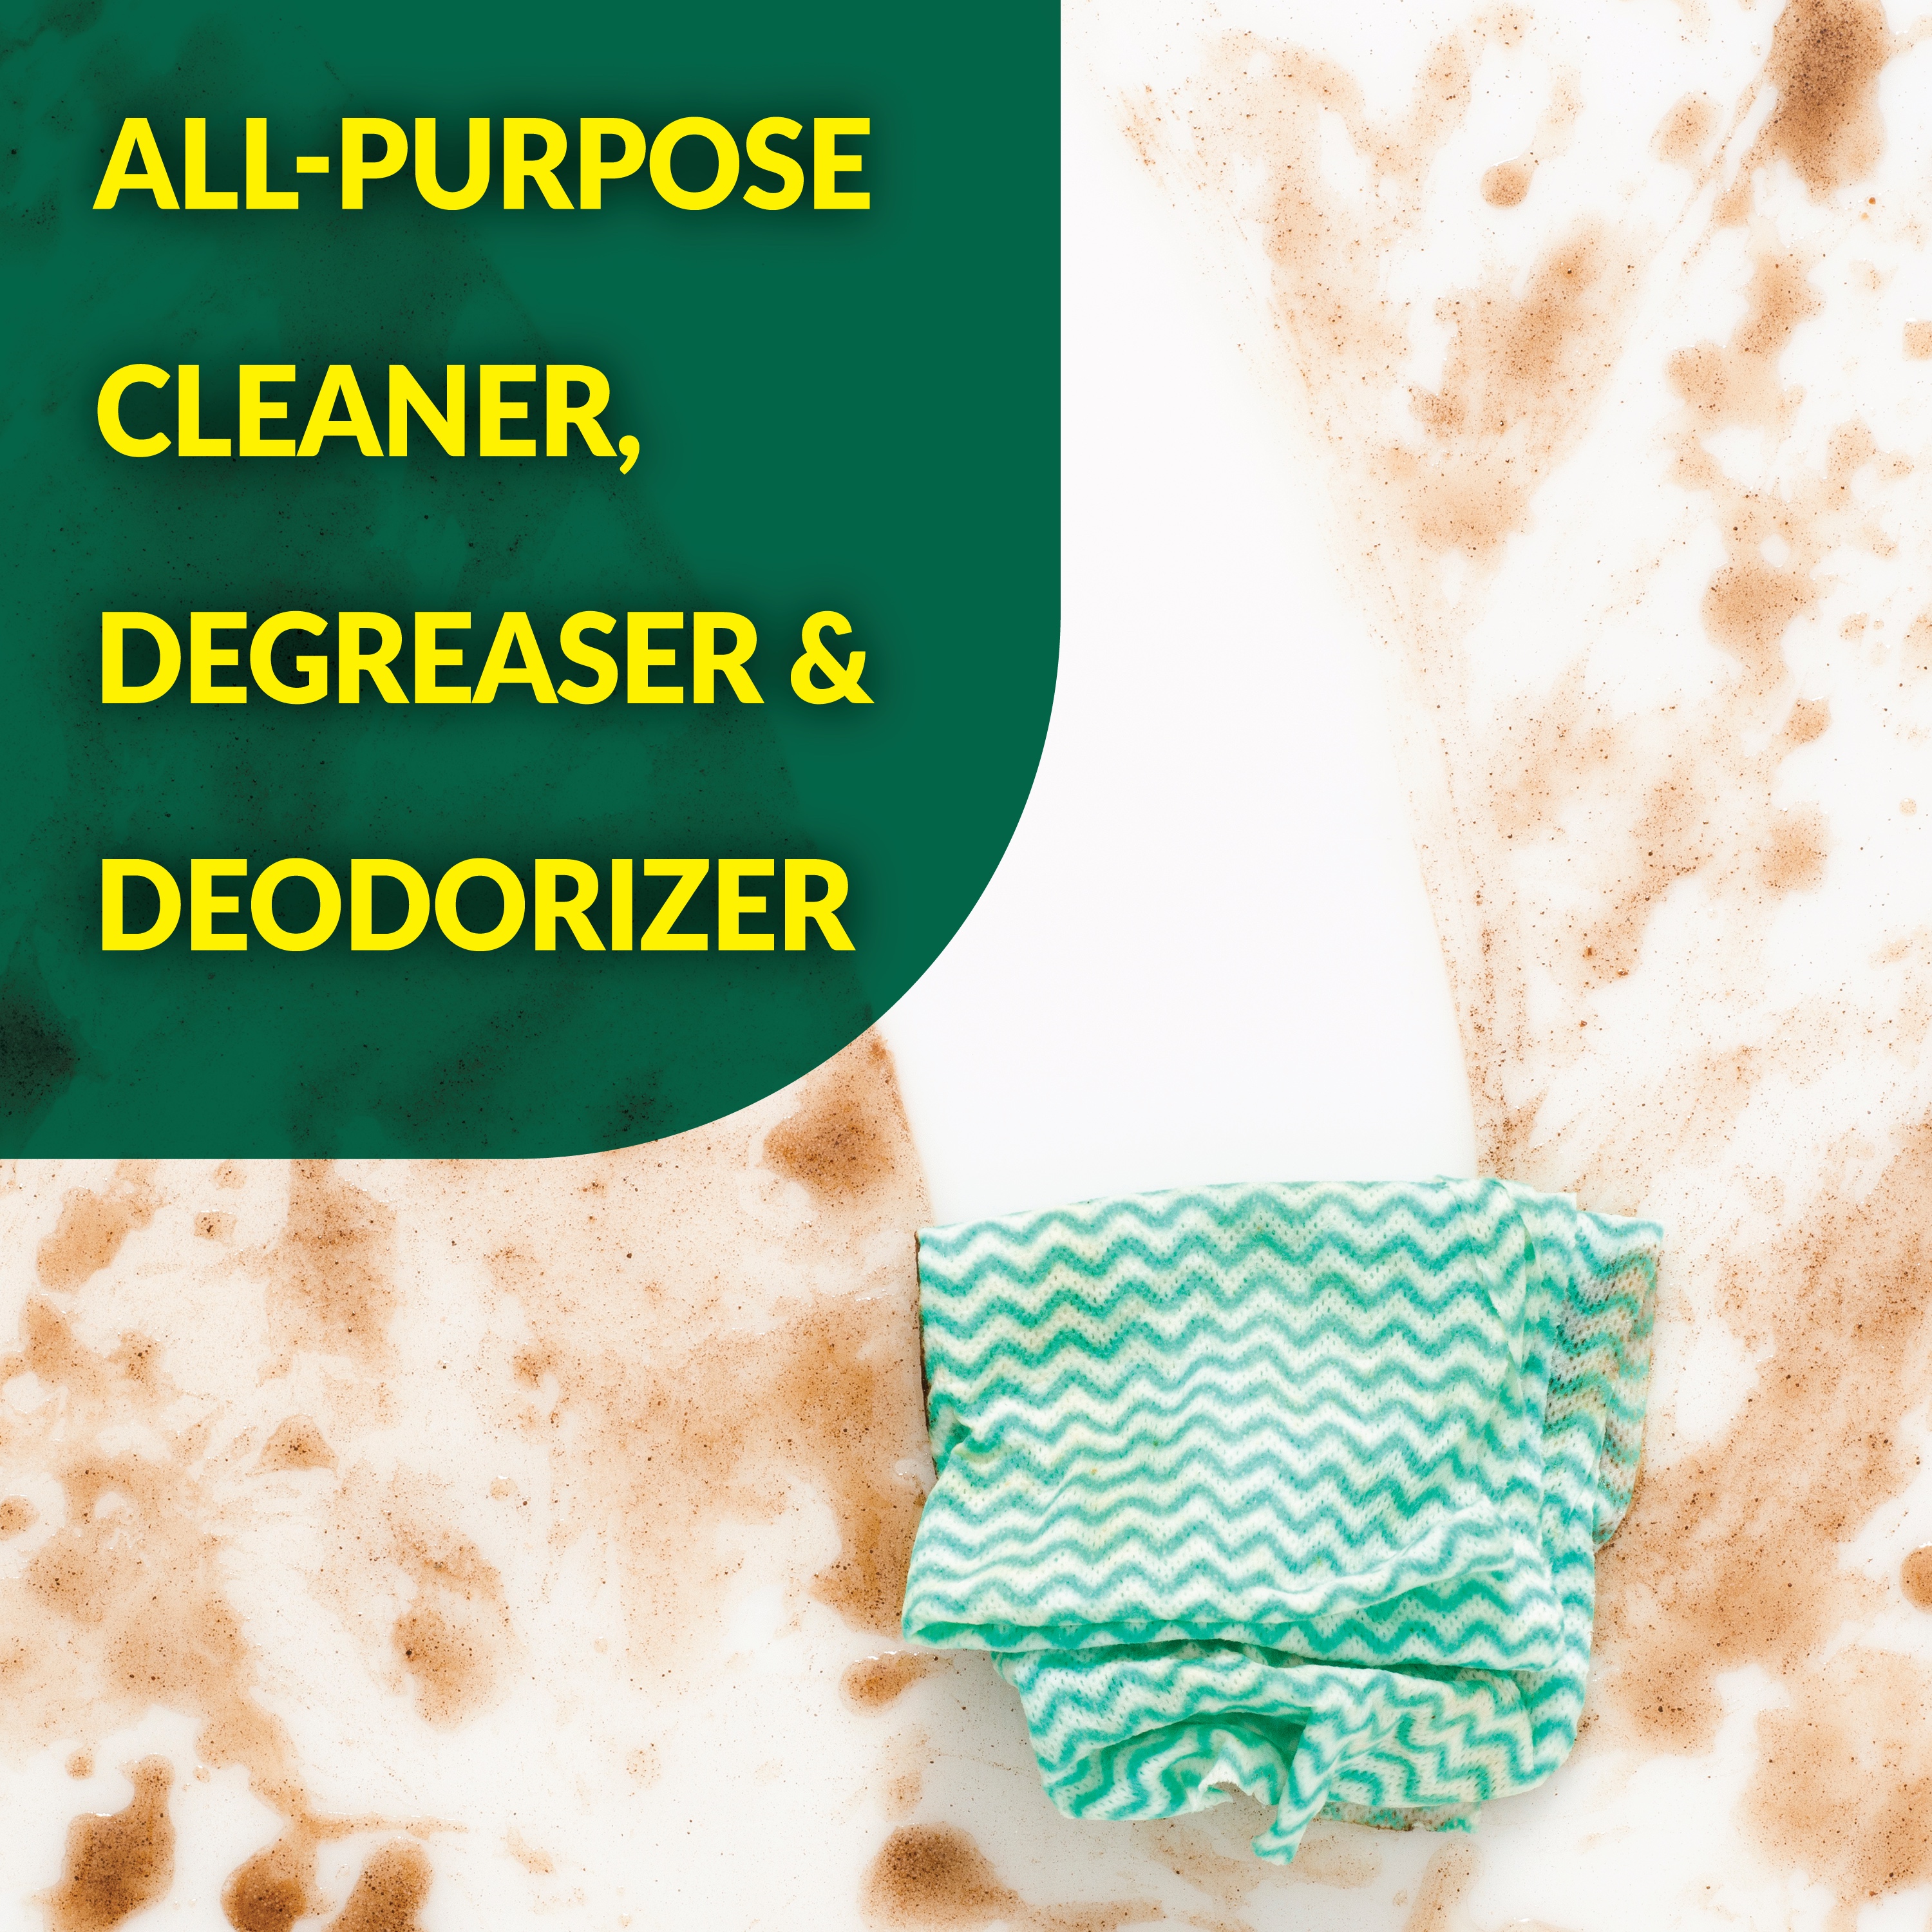 Simple Green All-Purpose Cleaner Concentrate, Spray Bottle, Original, 32 fl. oz - image 4 of 9